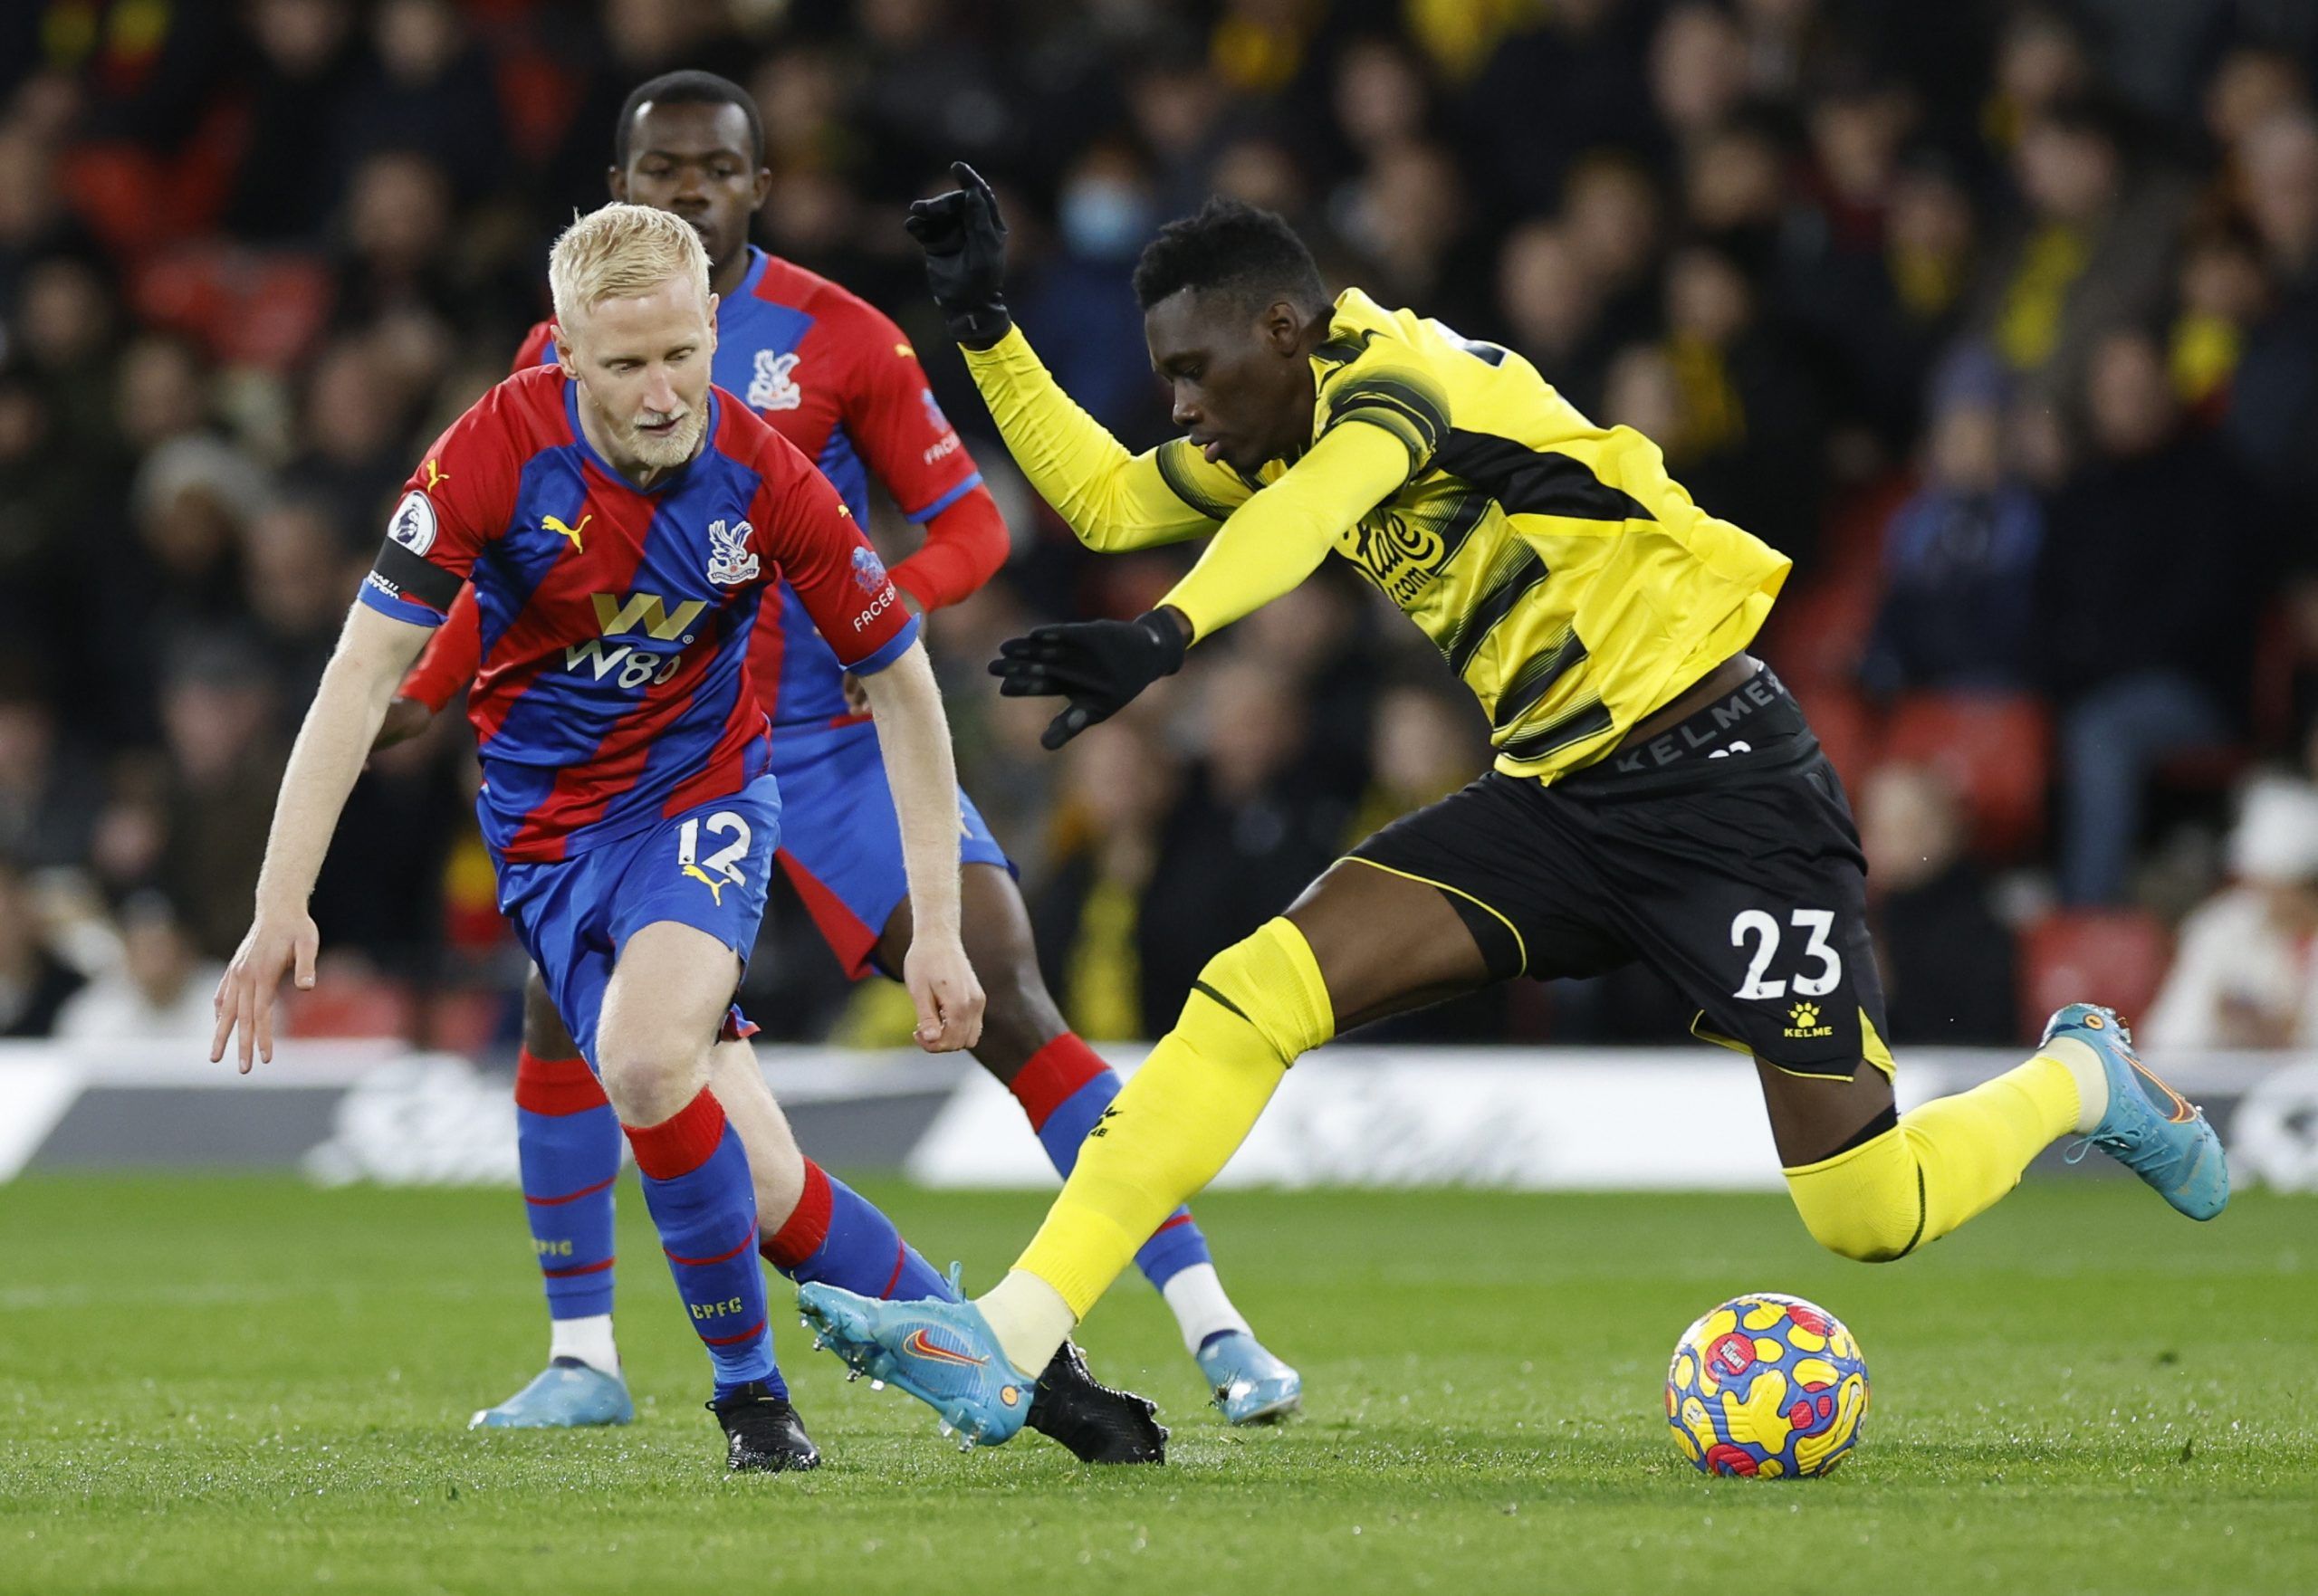 Soccer Football - Premier League - Watford v Crystal Palace - Vicarage Road, Watford, Britain - February 23, 2022 Crystal Palace's Will Hughes in action with Watford's Ismaila Sarr Action Images via Reuters/Peter Cziborra EDITORIAL USE ONLY. No use with unauthorized audio, video, data, fixture lists, club/league logos or 'live' services. Online in-match use limited to 75 images, no video emulation. No use in betting, games or single club /league/player publications.  Please contact your account 